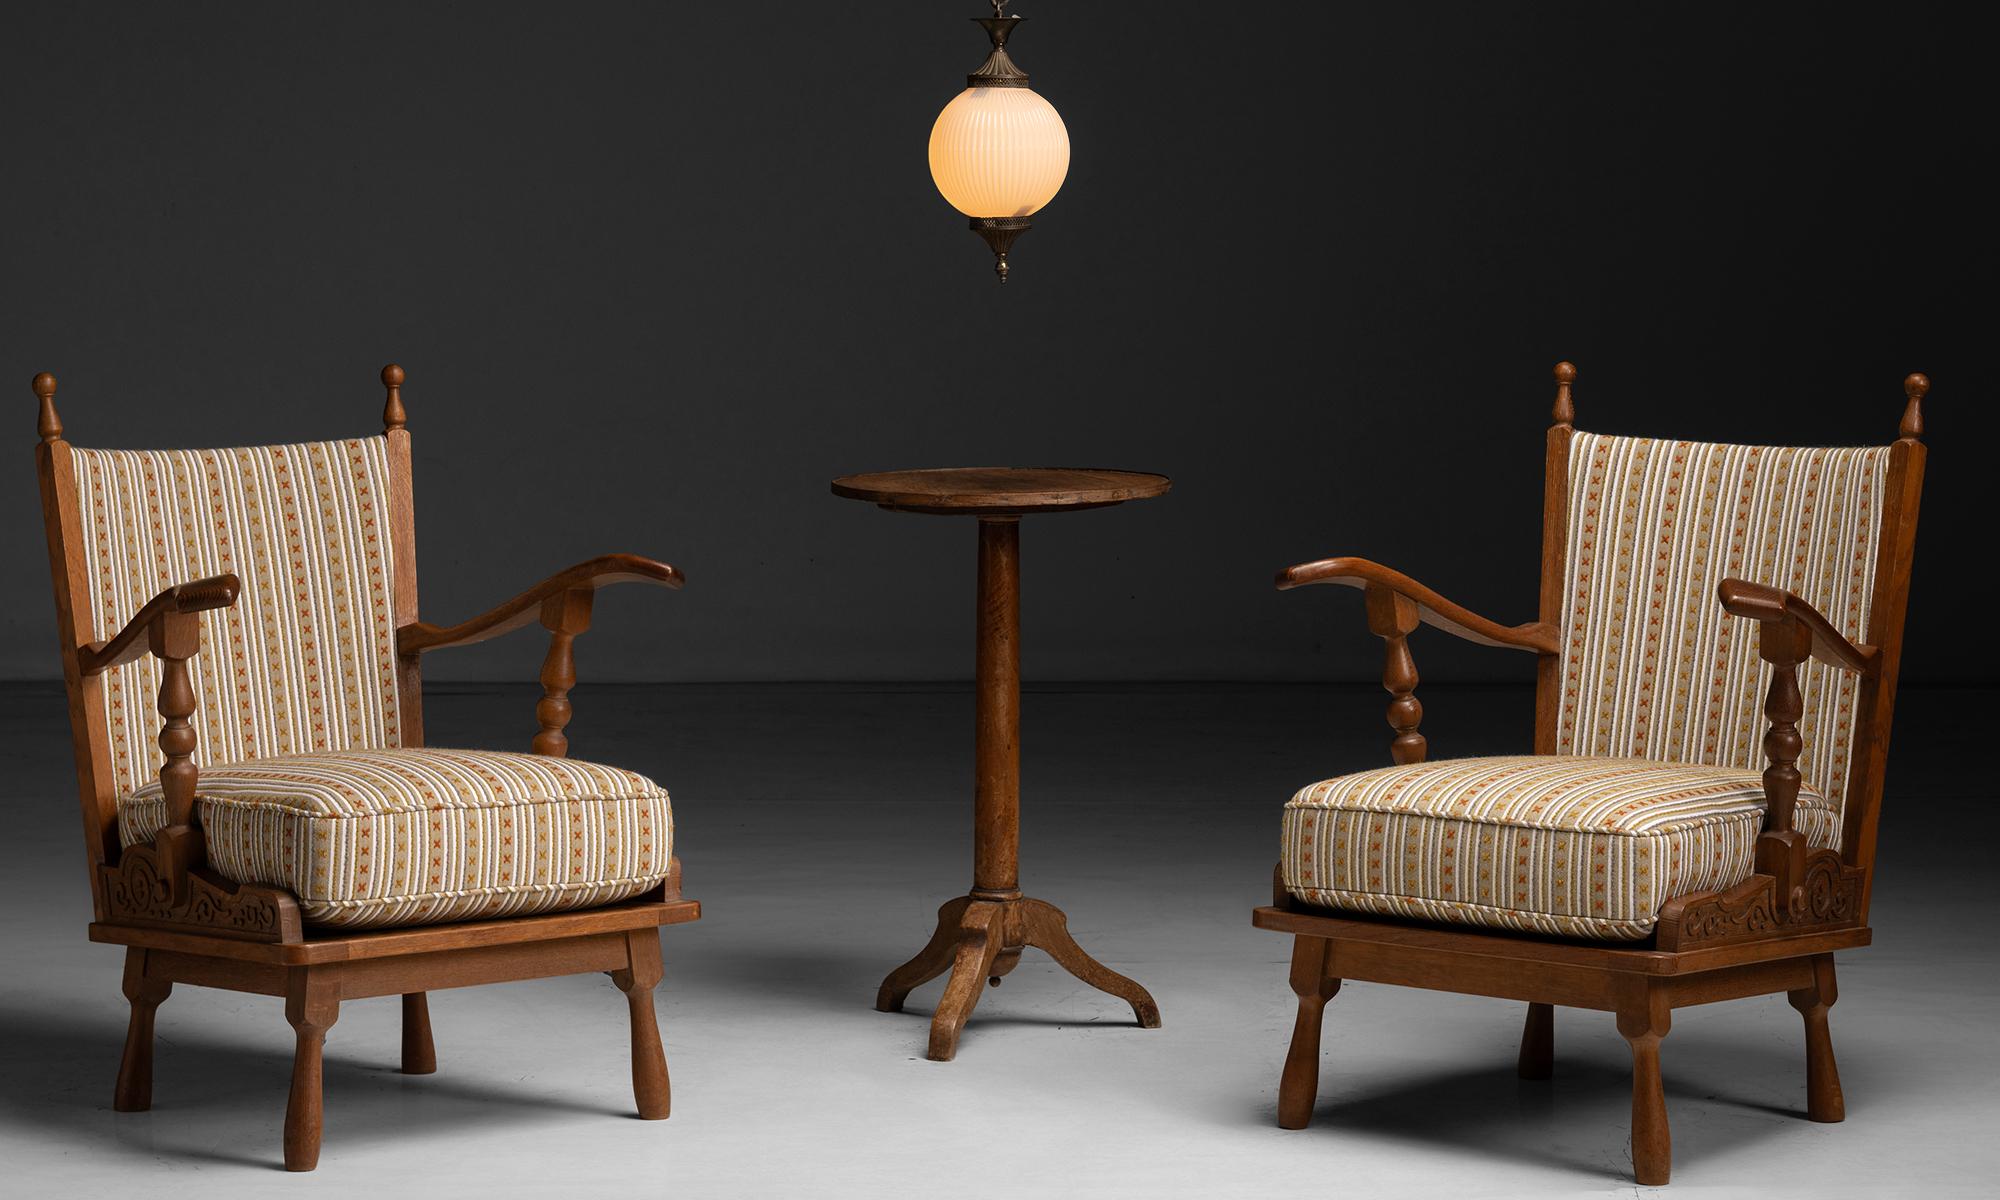 Carved Oak Armchairs in Christopher Farr Fabric

France circa 1960

Decorative relief carving on sides, with curved / turned arms. Newly upholstered in cotton blend by Christopher Farr.

27